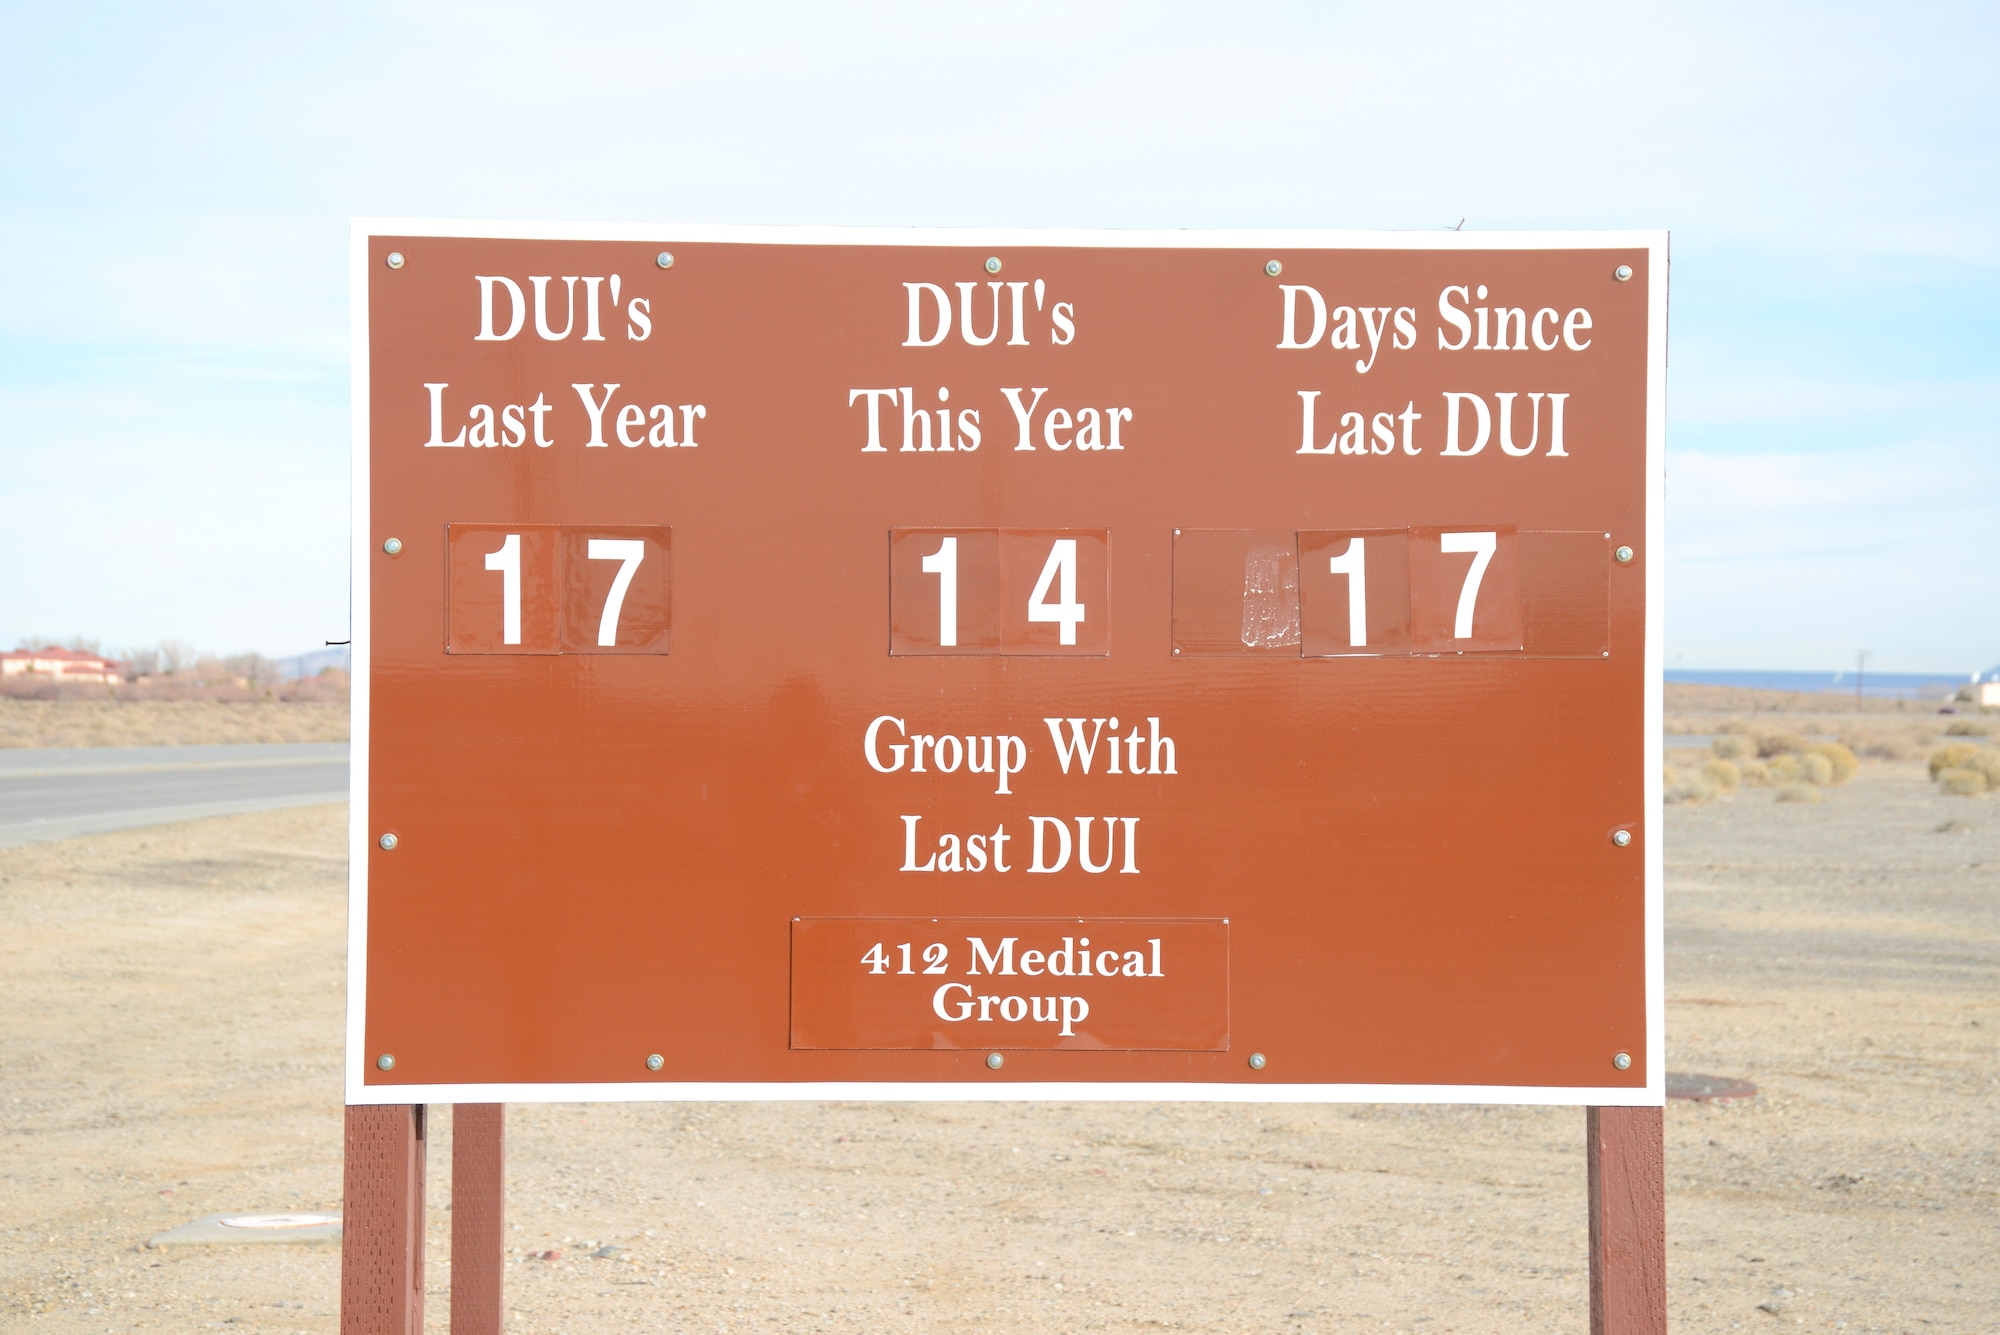 The Edwards AFB DUI awareness sign located at the intersection of Lancaster Blvd. and Fitz-Gerald Blvd. (U.S. Air Force photo)